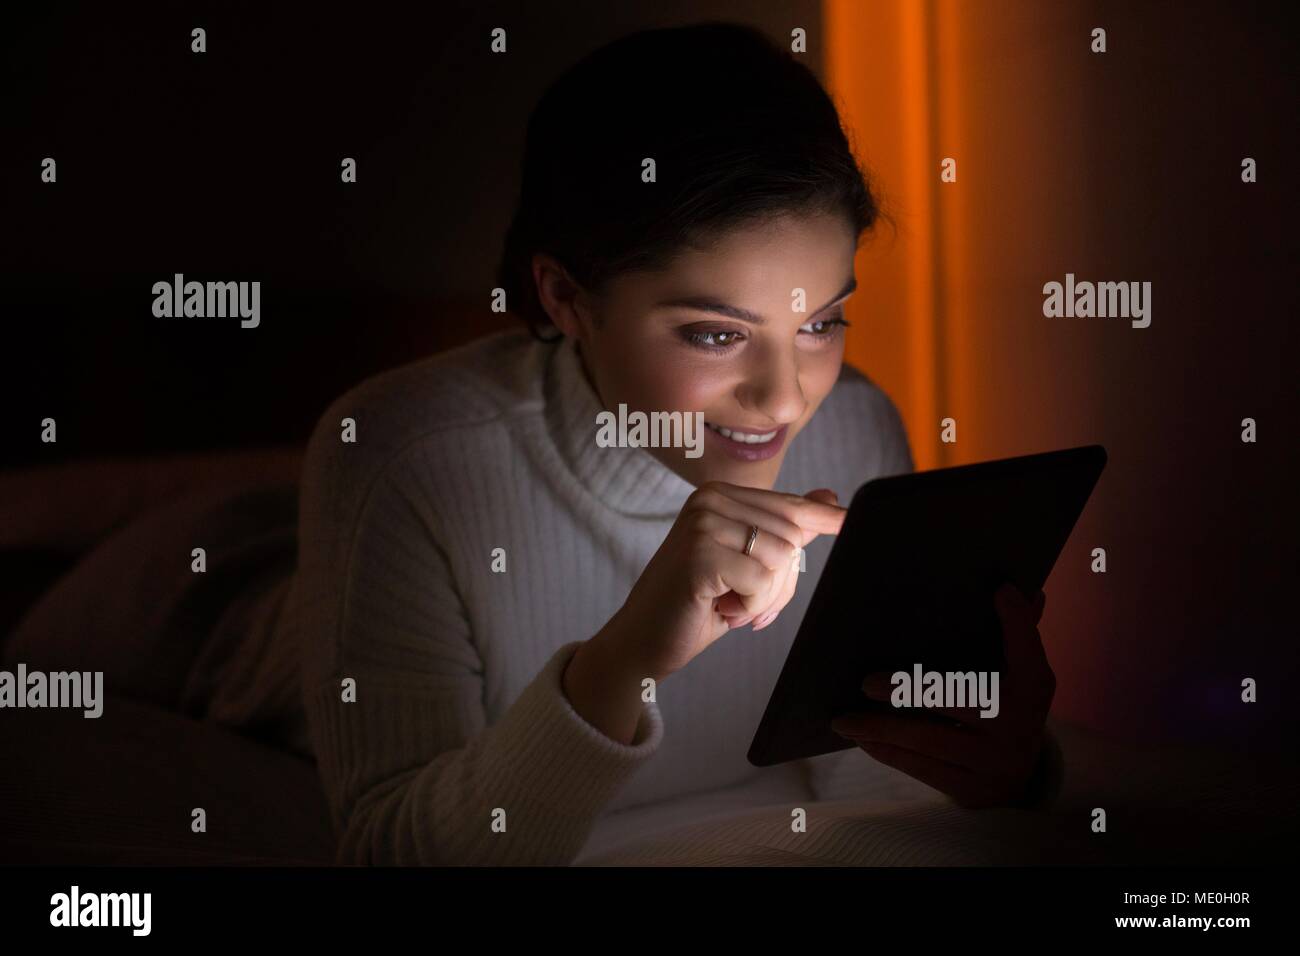 Young woman using digital tablet in dark room. Stock Photo